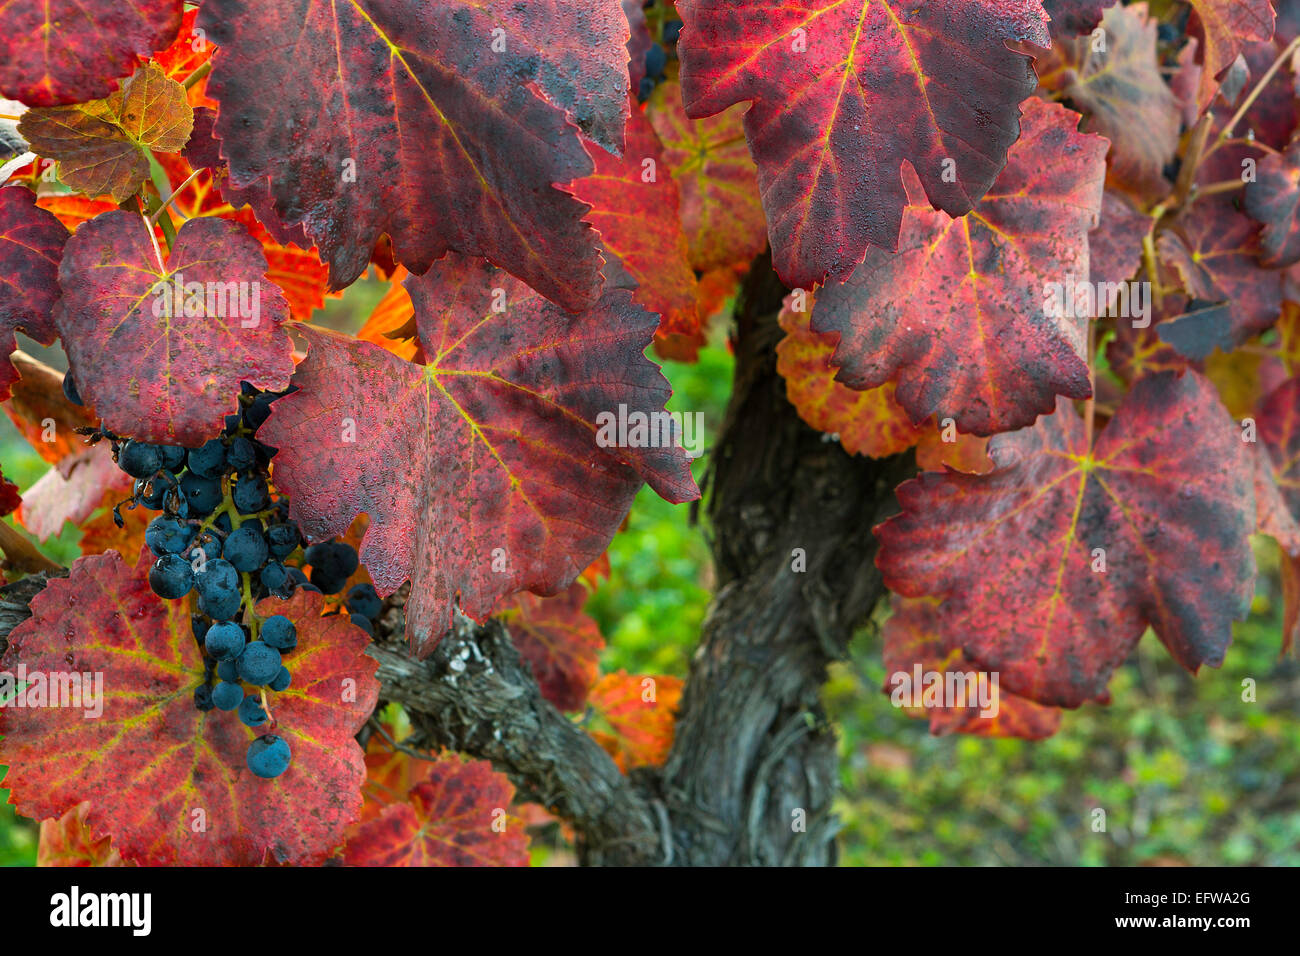 Grapes and grape leaves still on the vine on a frosty morning in fall. Leavenworth, Washington. USA Stock Photo